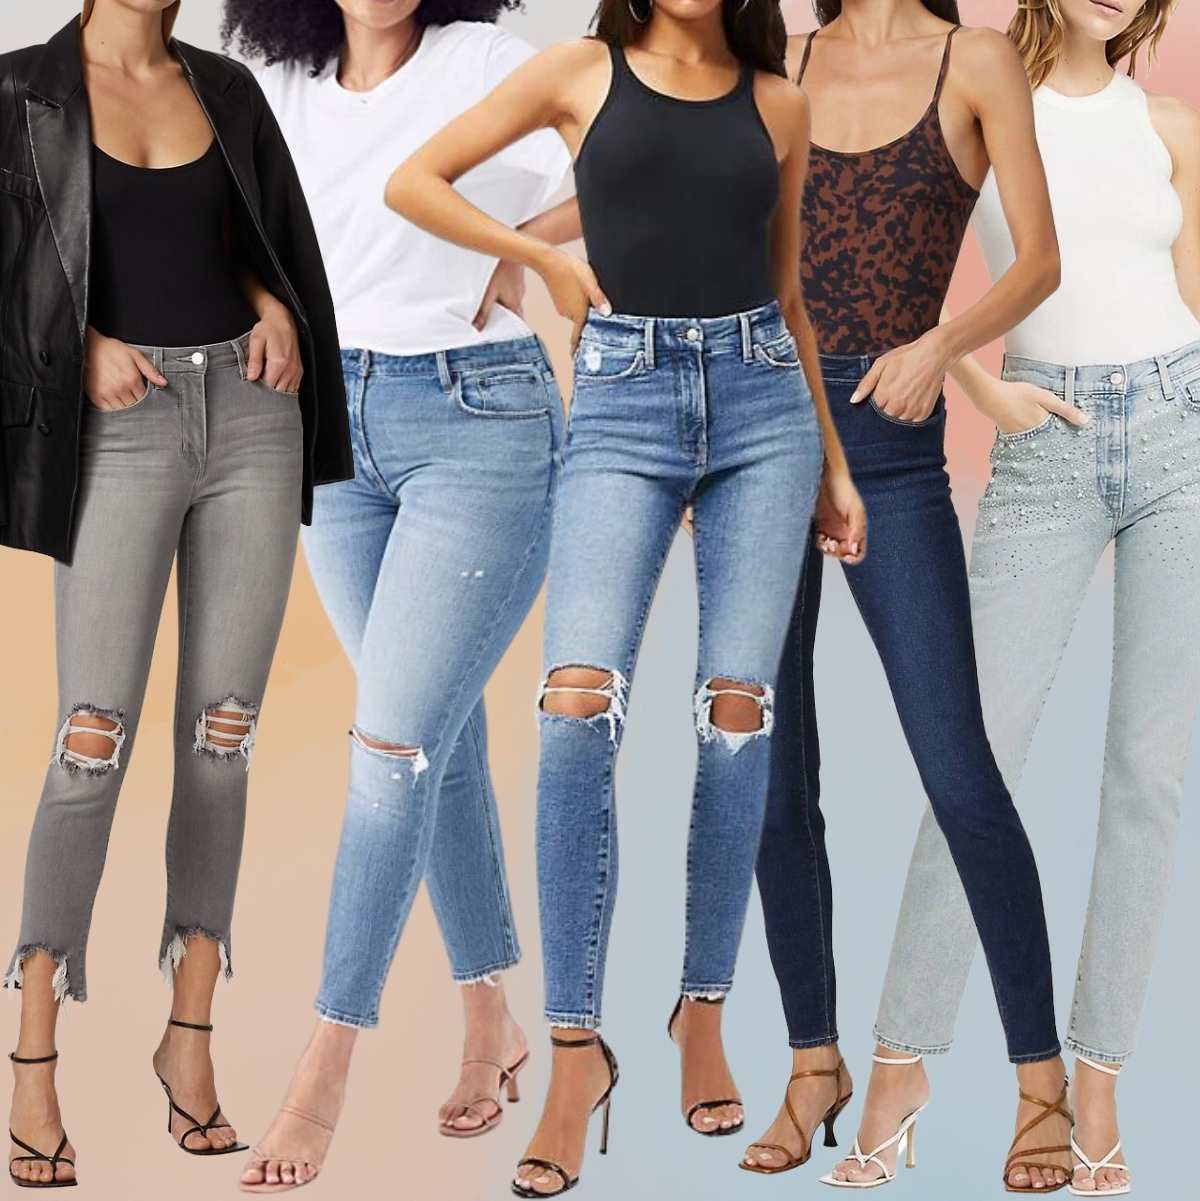 Curious What Shoes To Wear With Skinny Jeans Outfits? Here Are 15